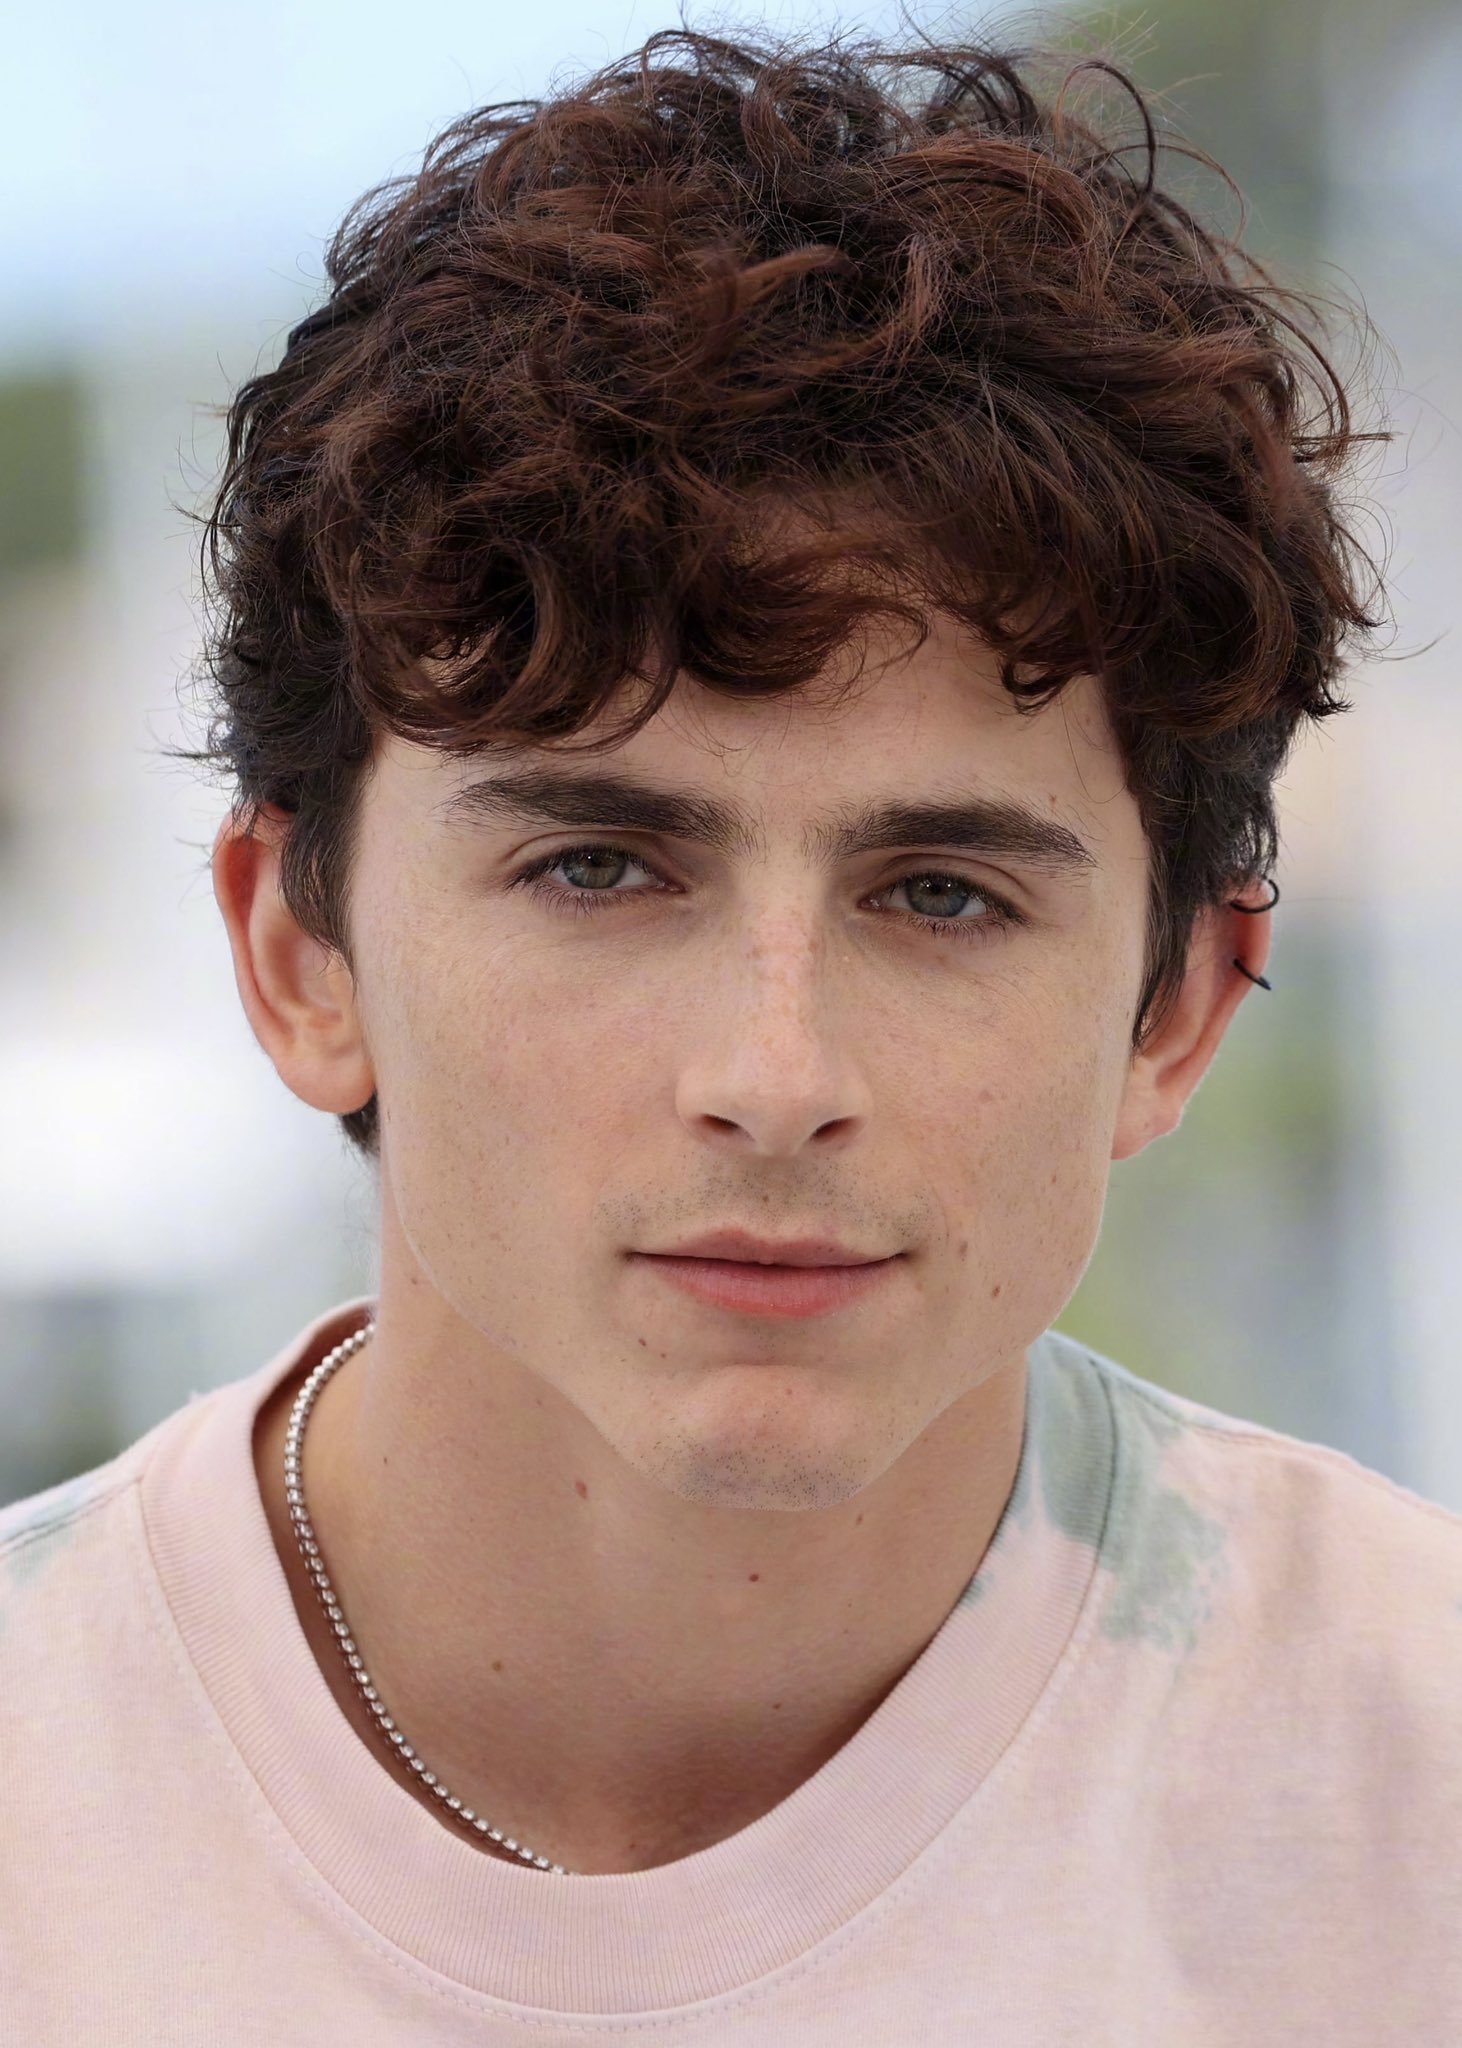 Timothée Chalamet's looks: From runway to red carpet